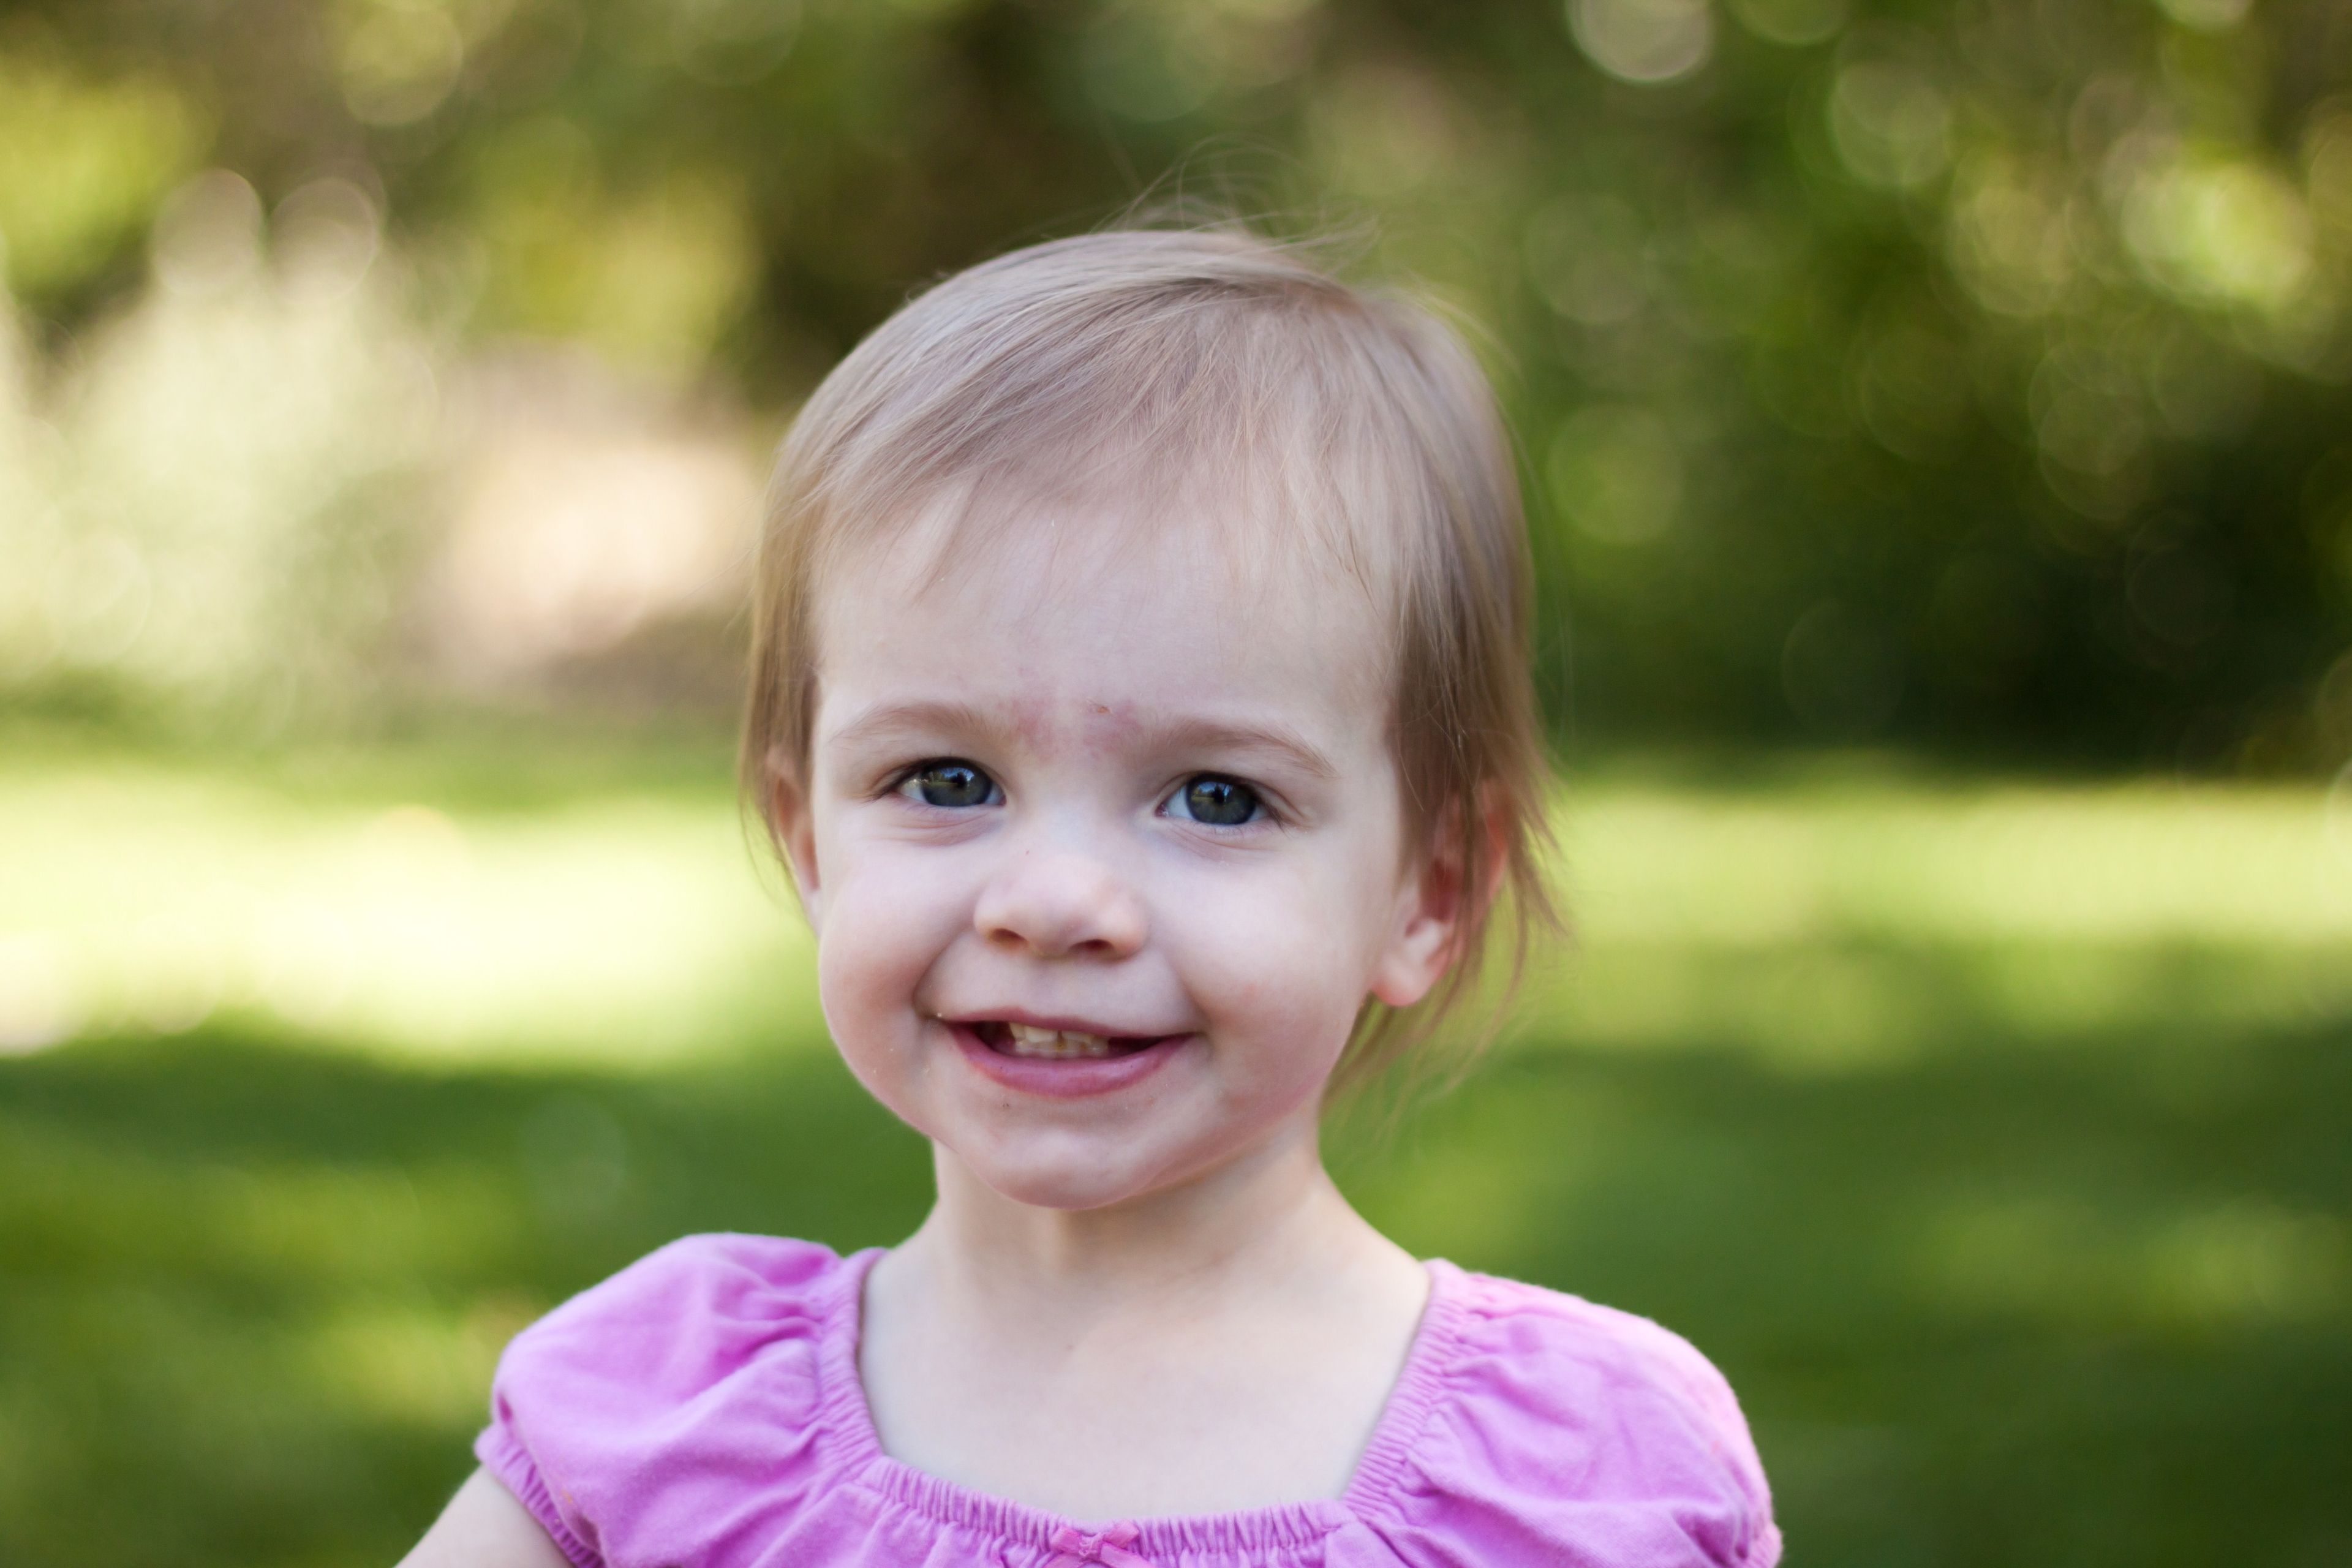 A toddler girl in a pink shirt, smiling.